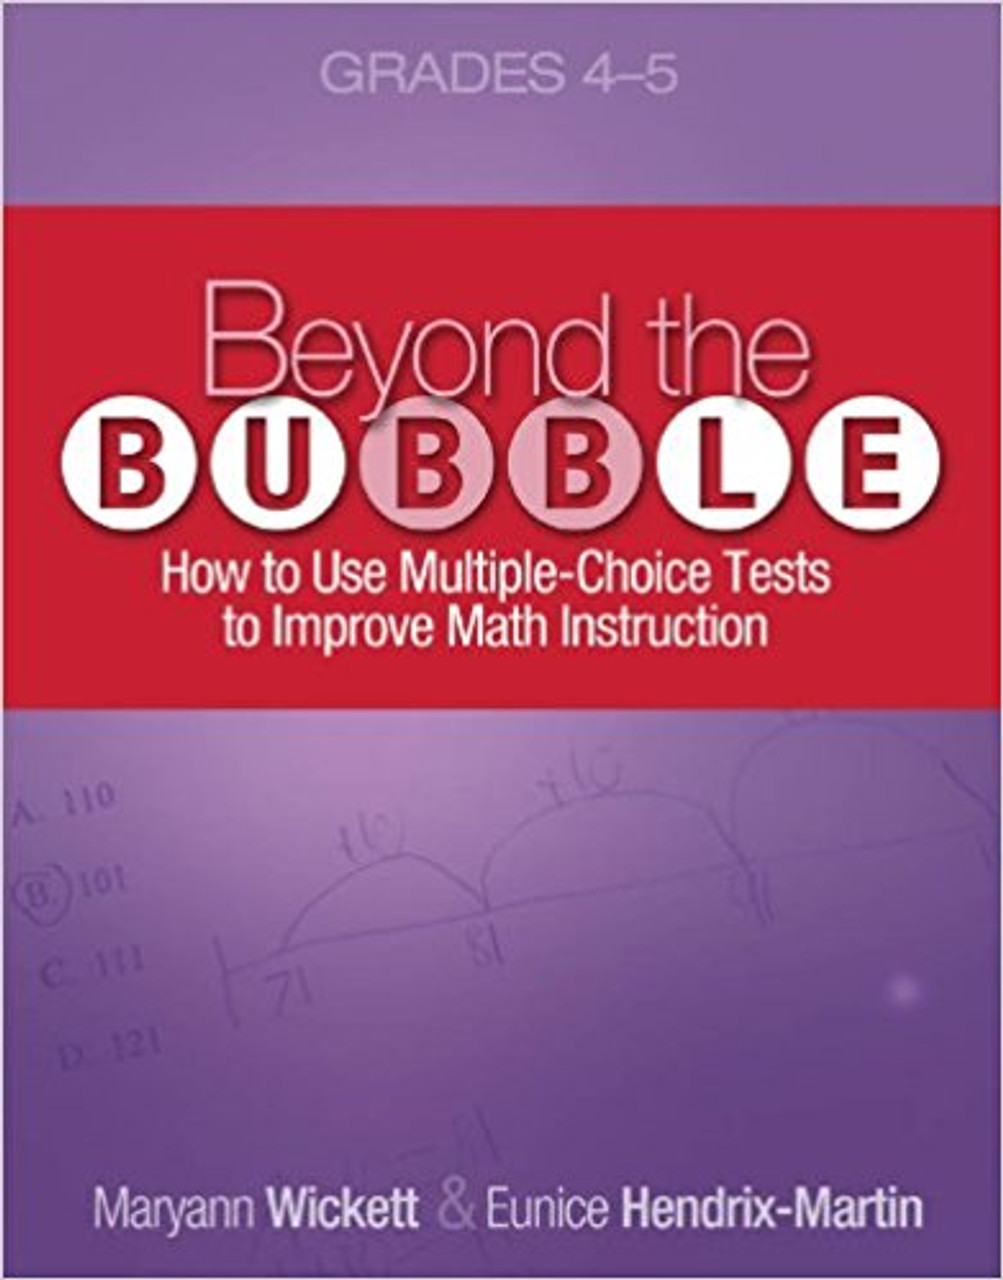 Beyond the Bubble (Grades 4-5): How to Use Multiple-Choice Tests to Improve Math Instruction, Grades 4-5 by Maryann Wickett